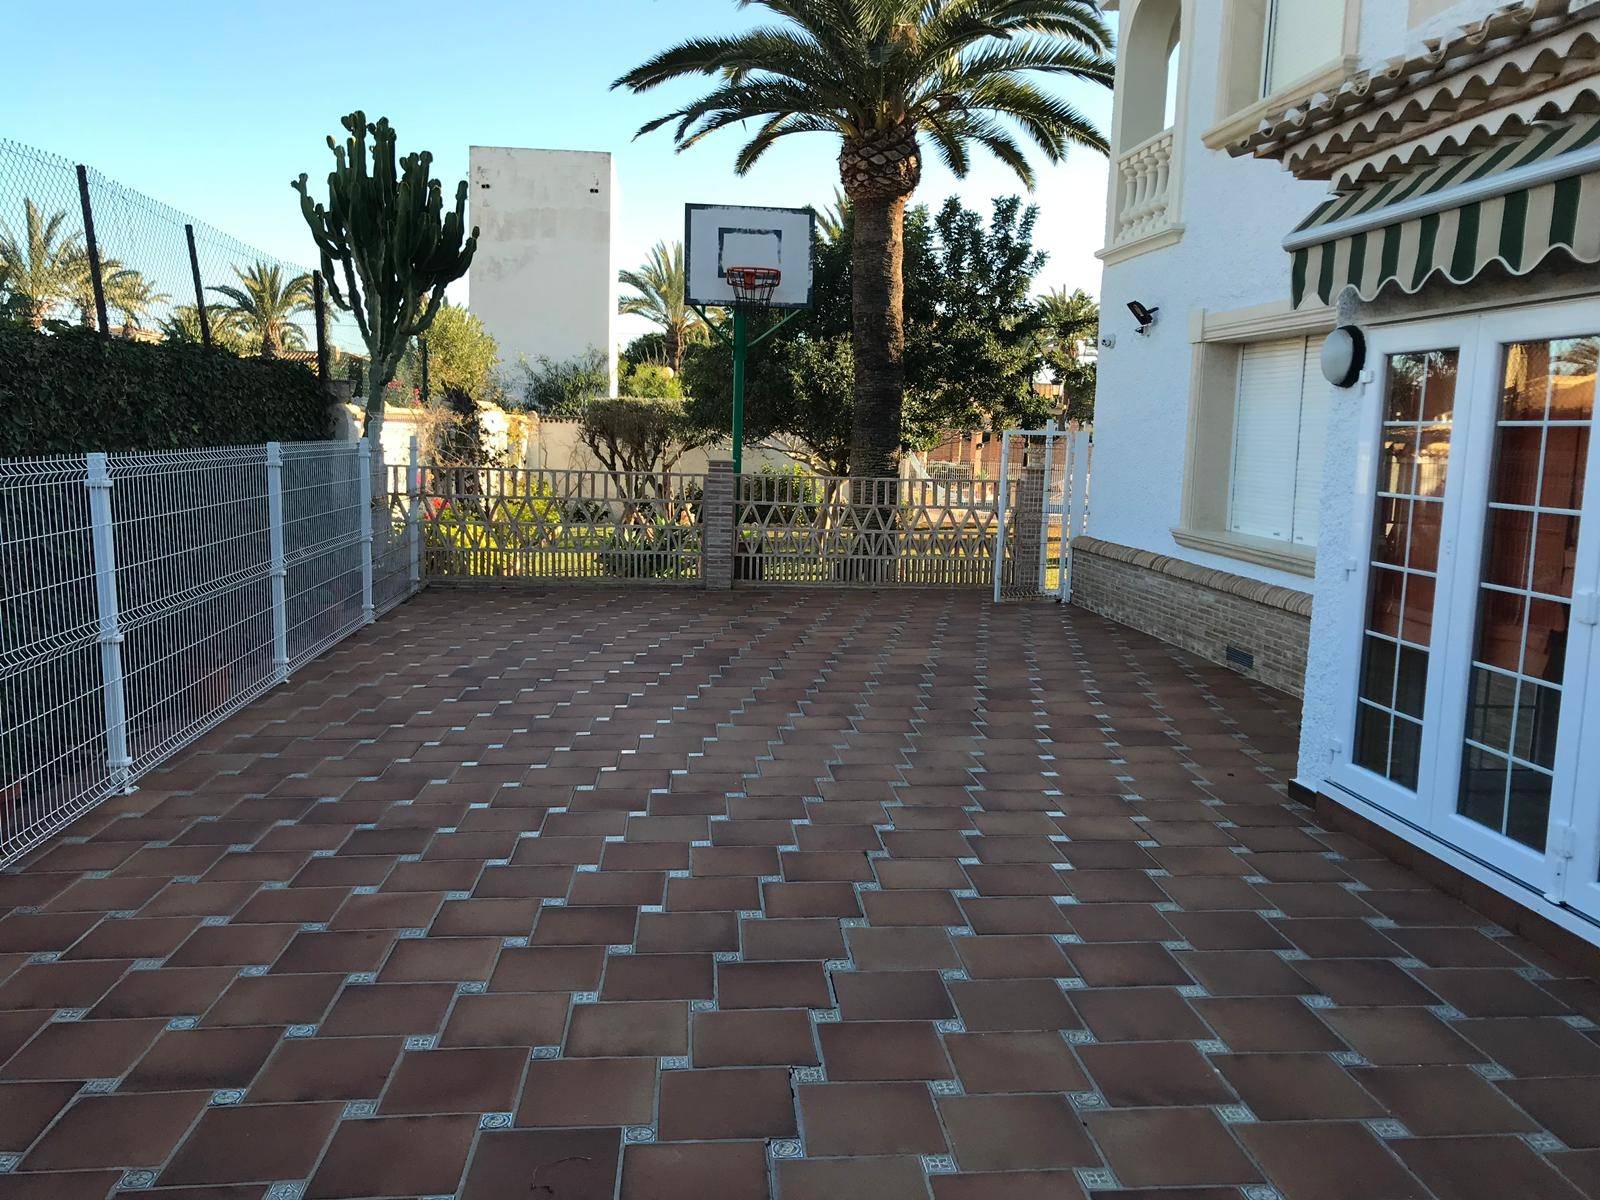 VILLA OF 1500 M2 PLOT IN URB. CABO ROIG 100 METERS FROM THE SEA